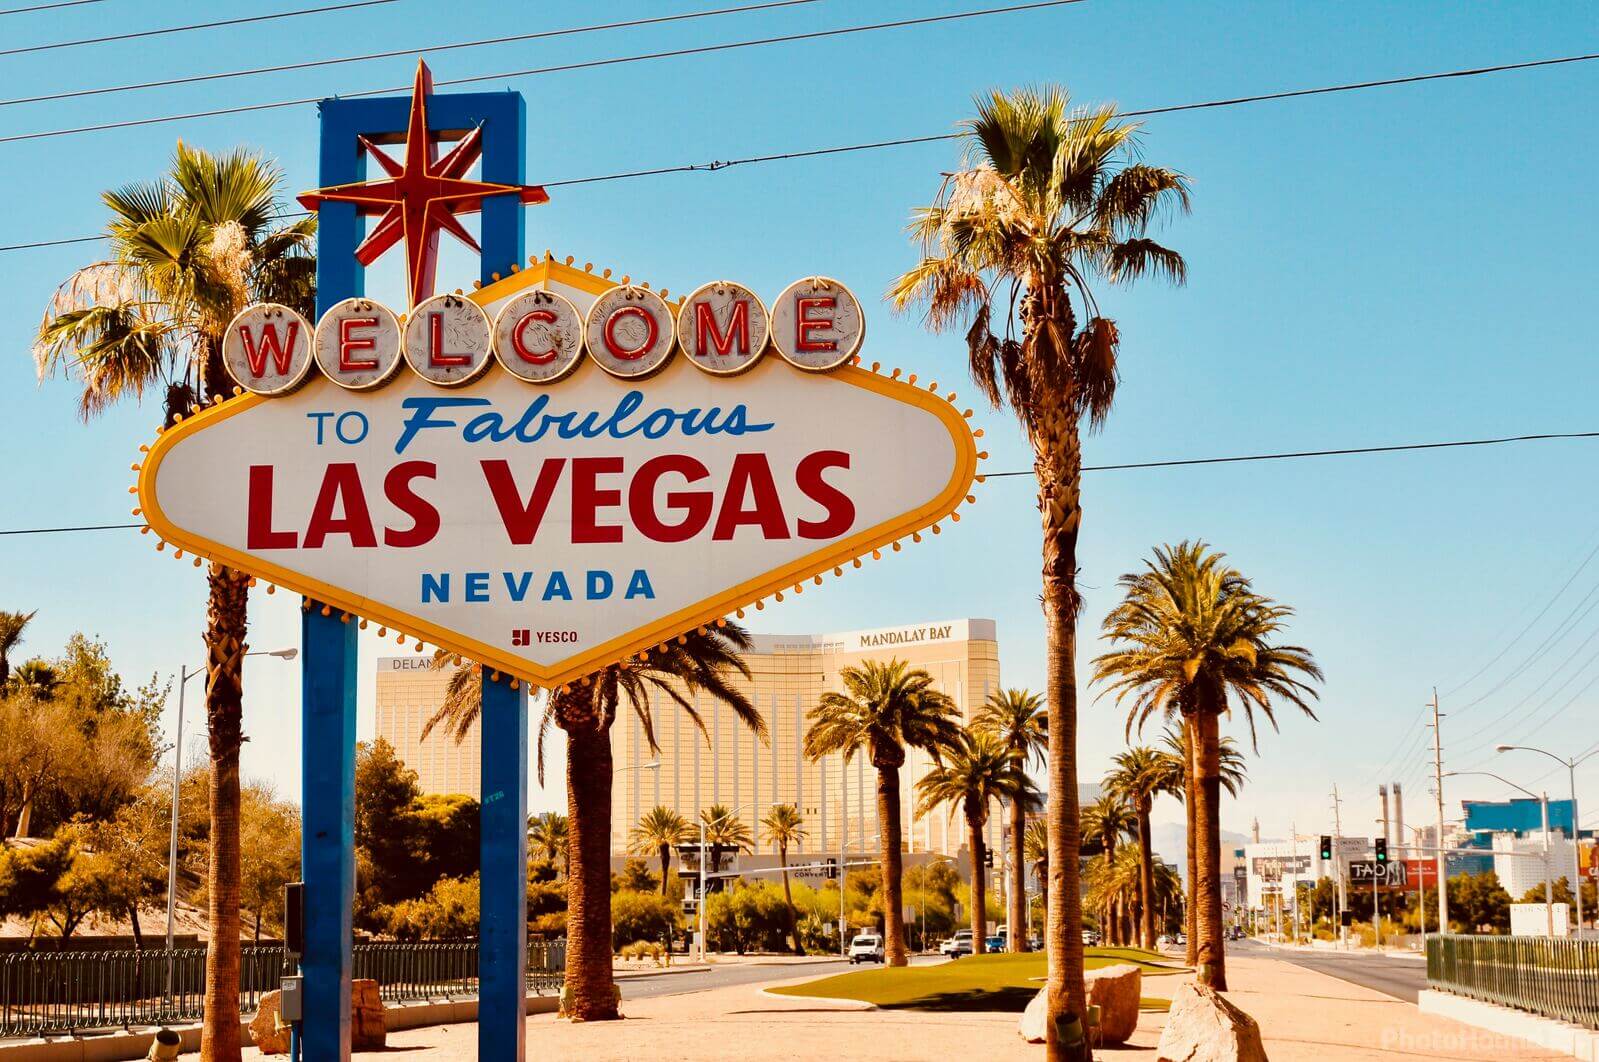 Image of Welcome To Fabulous Las Vegas by Team PhotoHound